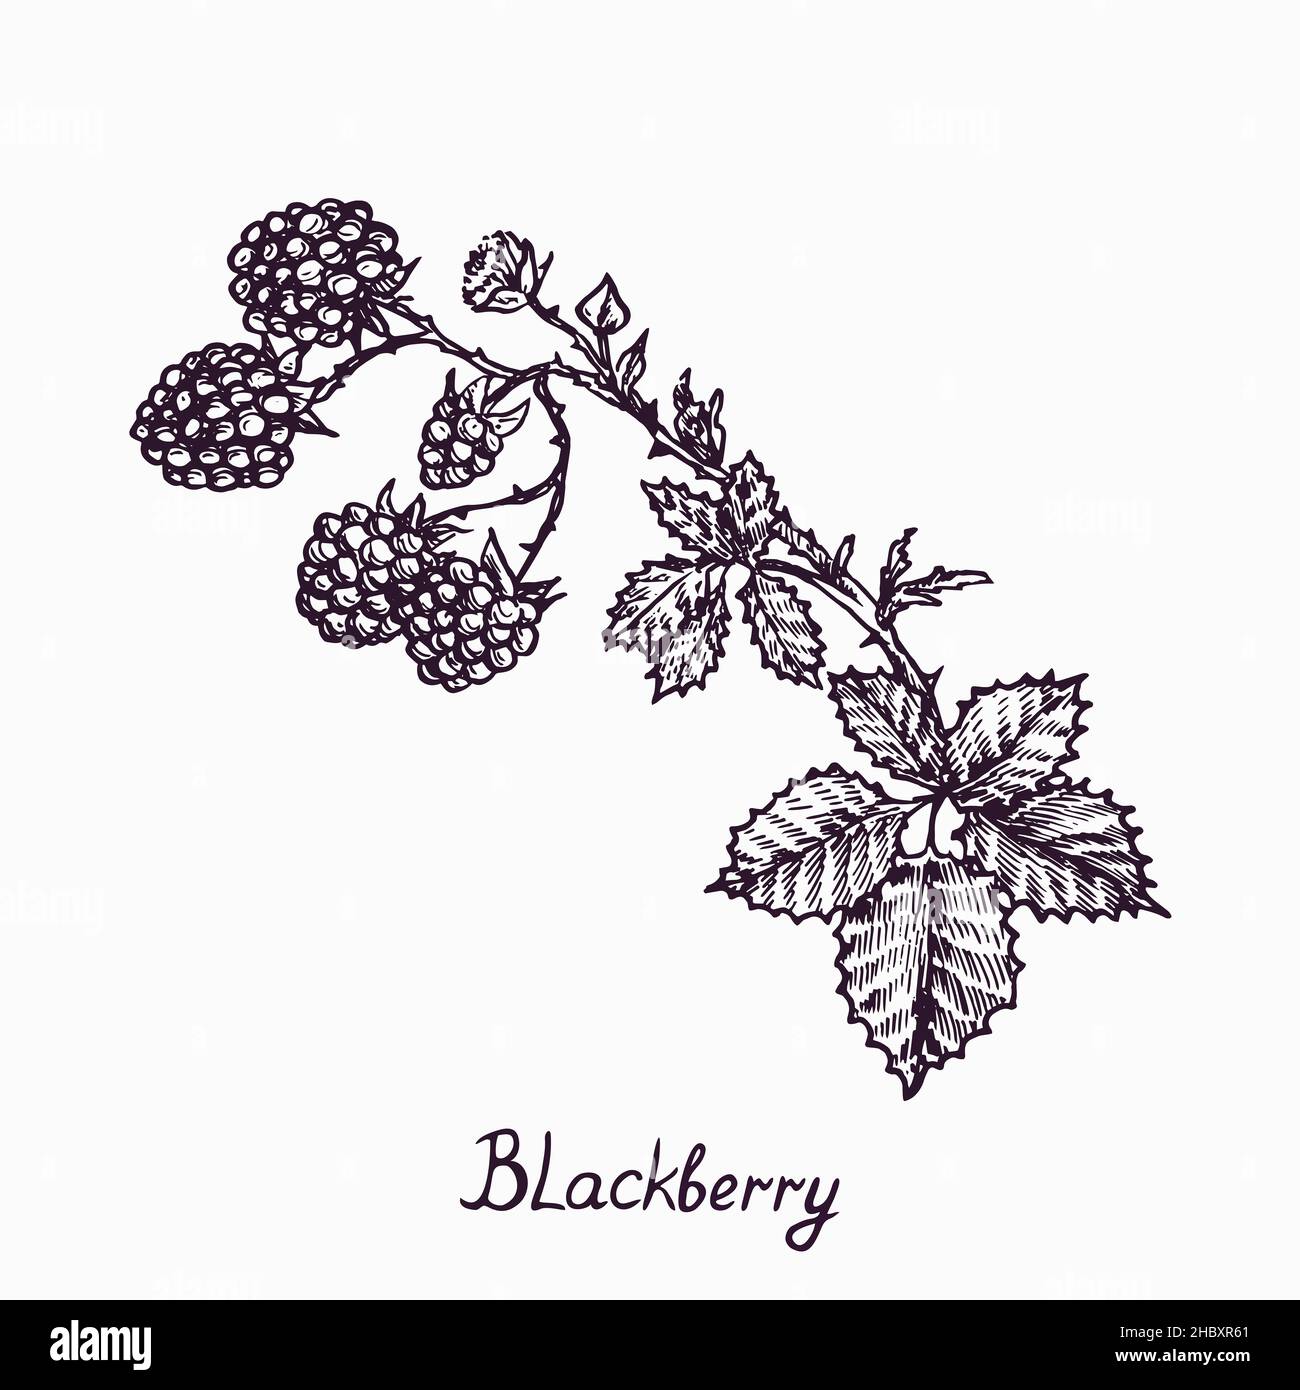 Blackberry branch with berries and leaves, simple doodle drawing with inscription, gravure style Stock Photo